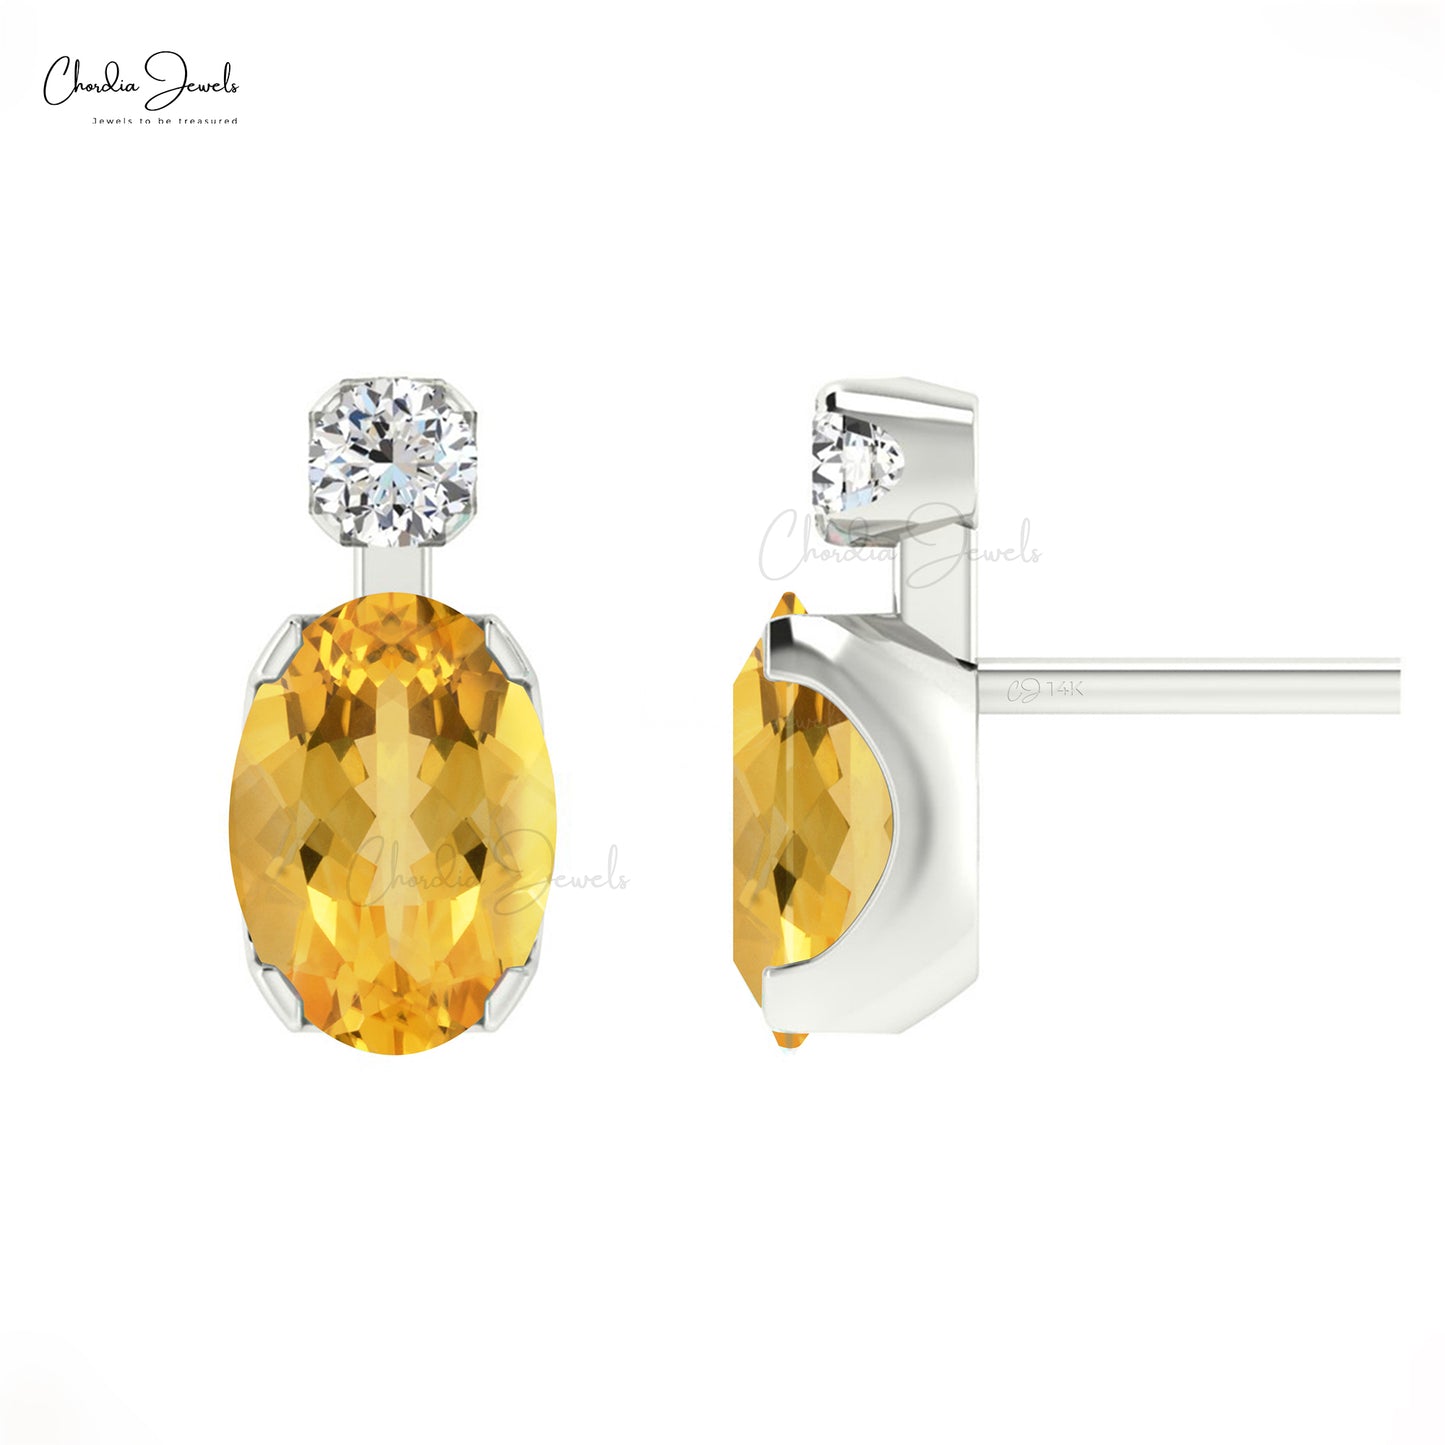 Buy Natural Yellow Sapphire Earrings in 14k Real Gold | Chordia Jewels